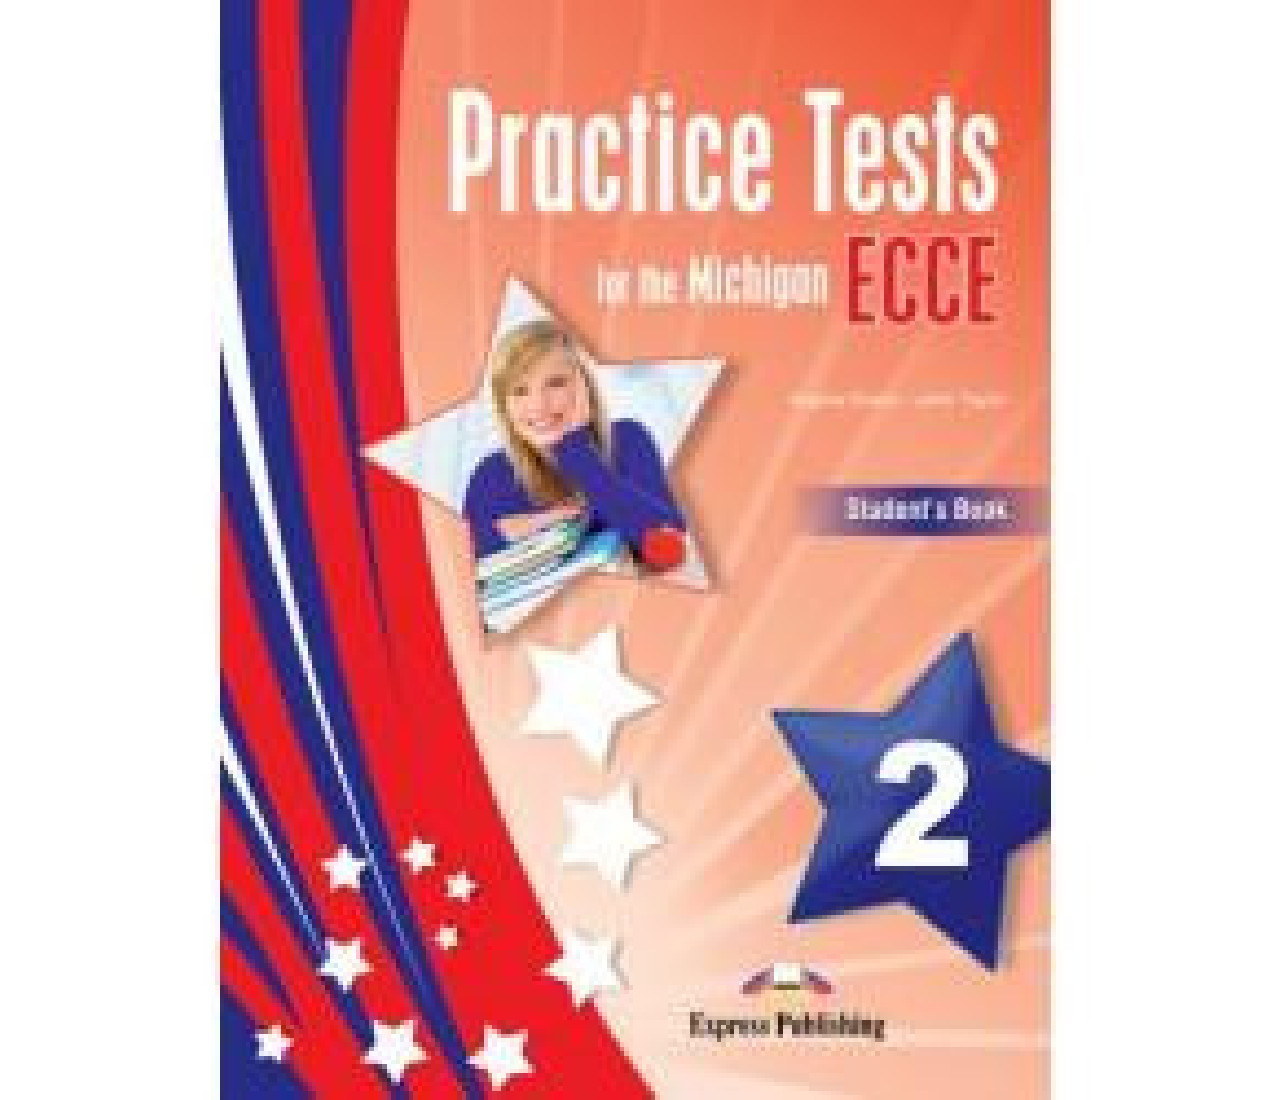 PRACTICE TESTS FOR MICHIGAN ECCE 2